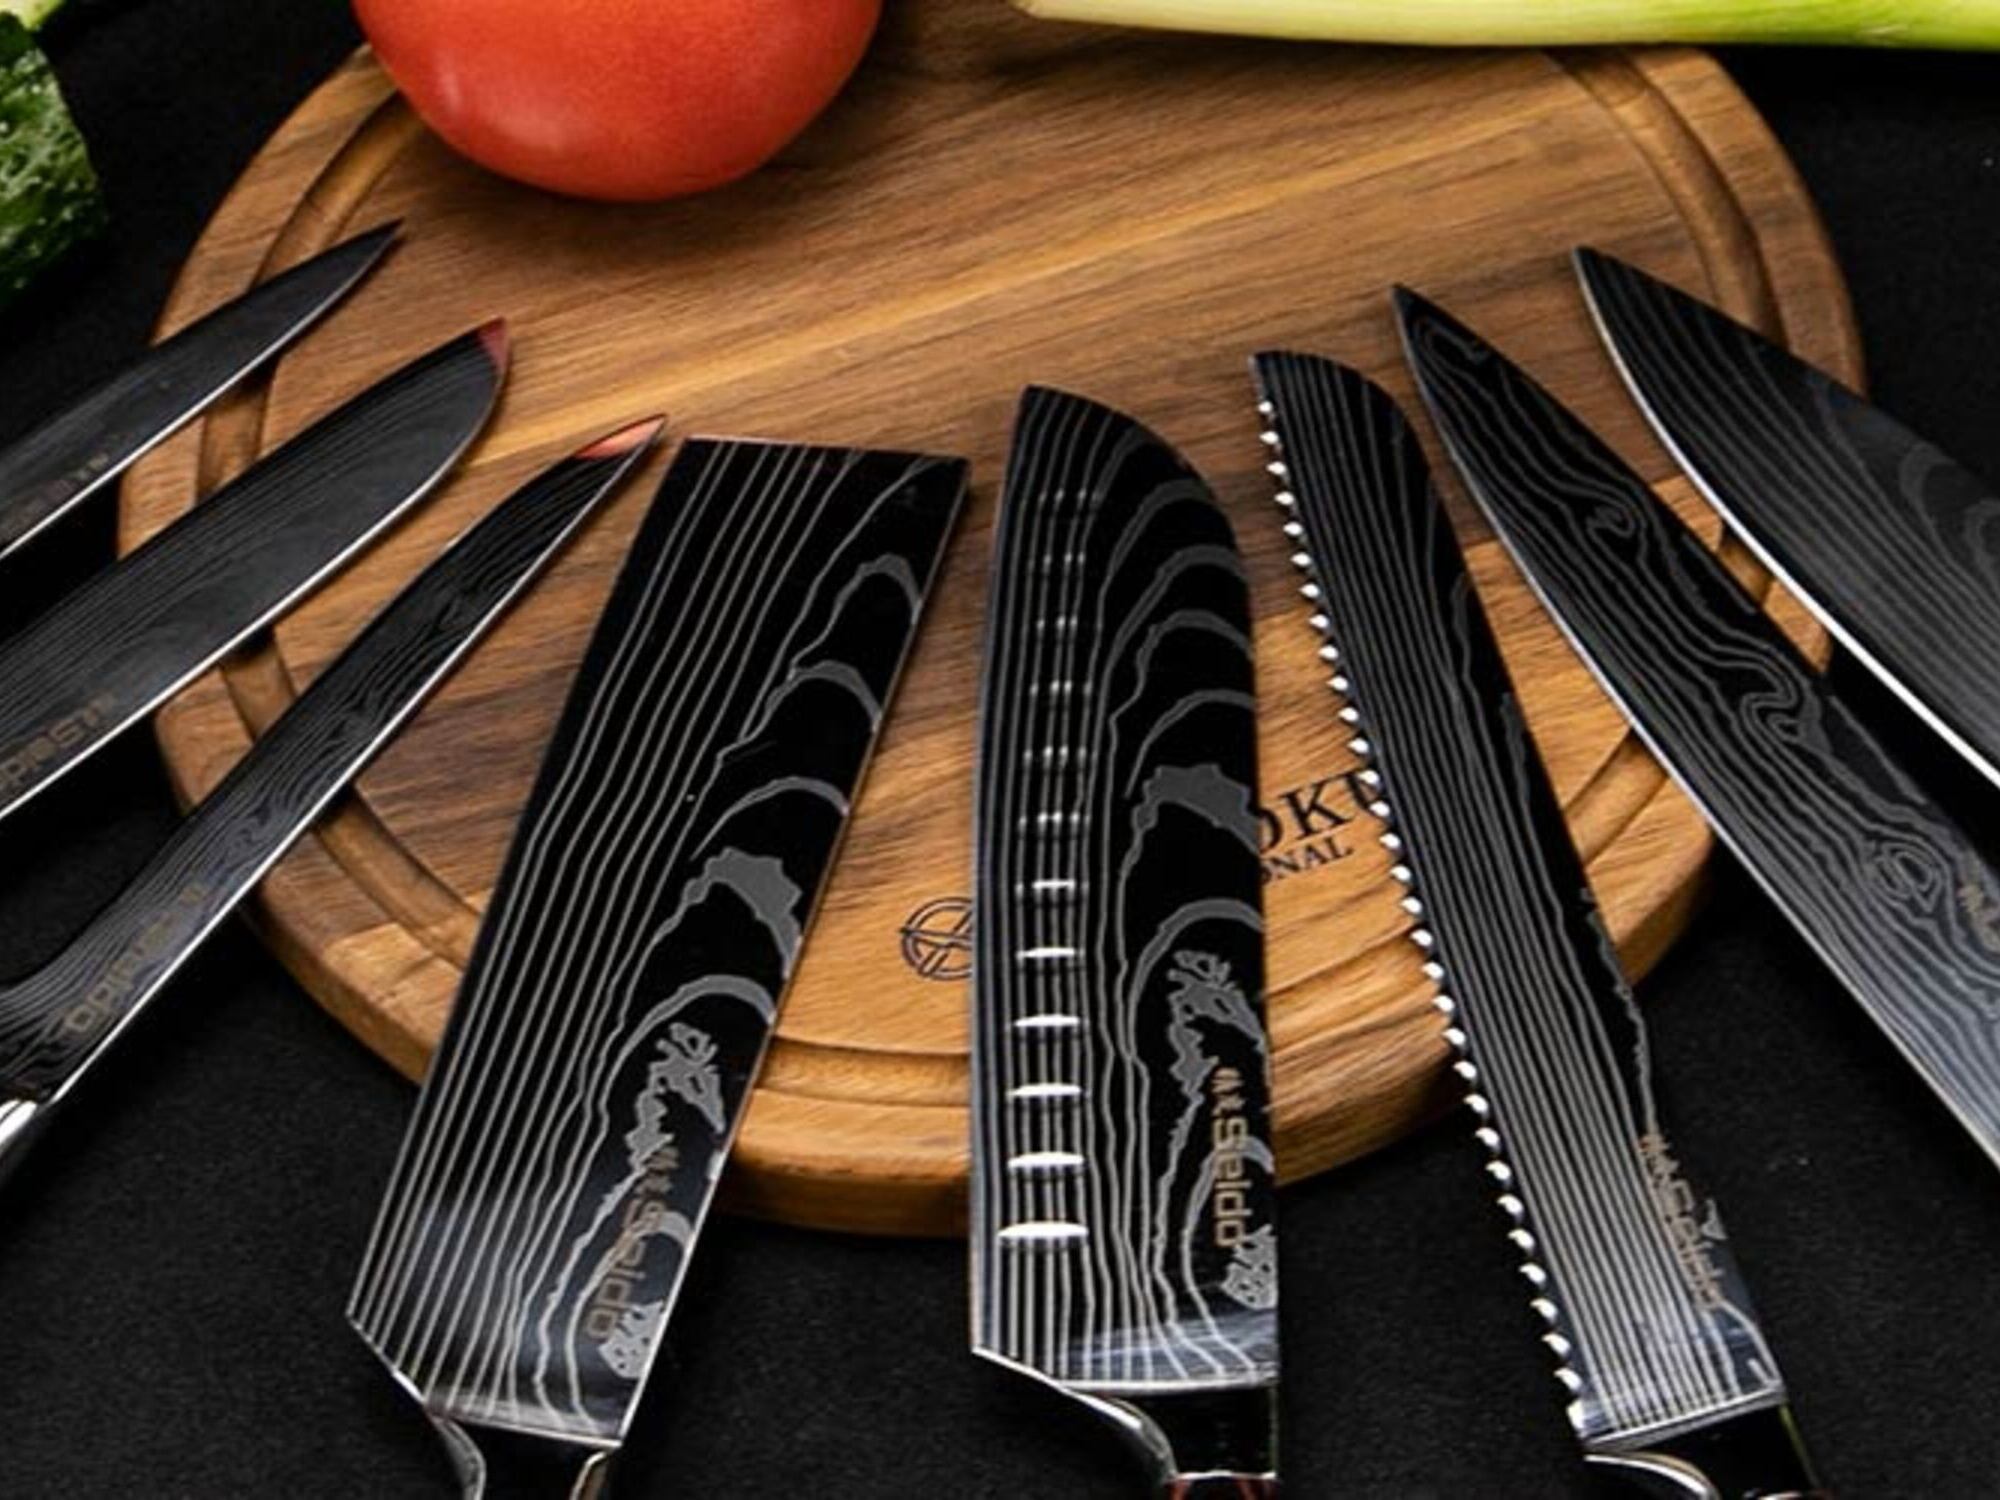 This 8-piece chef knife makes for a great present for your pals